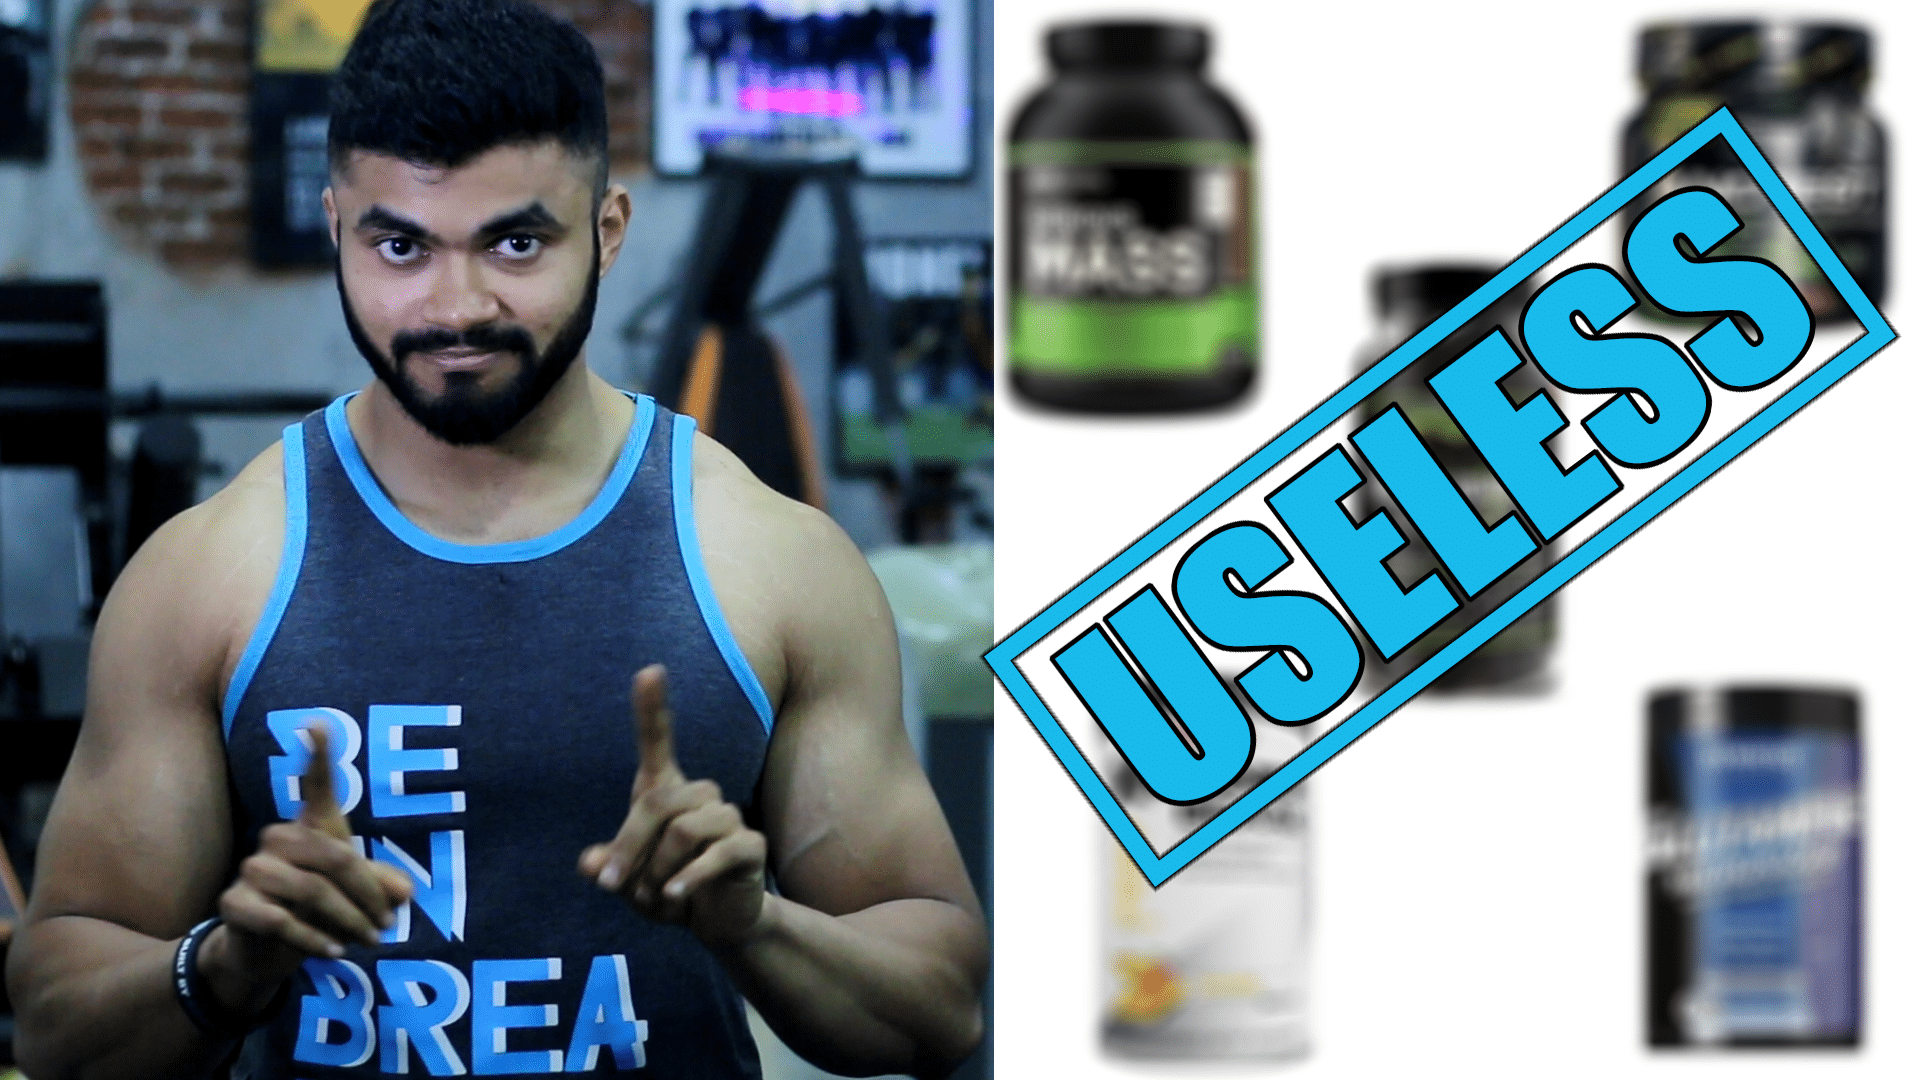 Top 5 Supplements that are a Complete WASTE OF MONEY